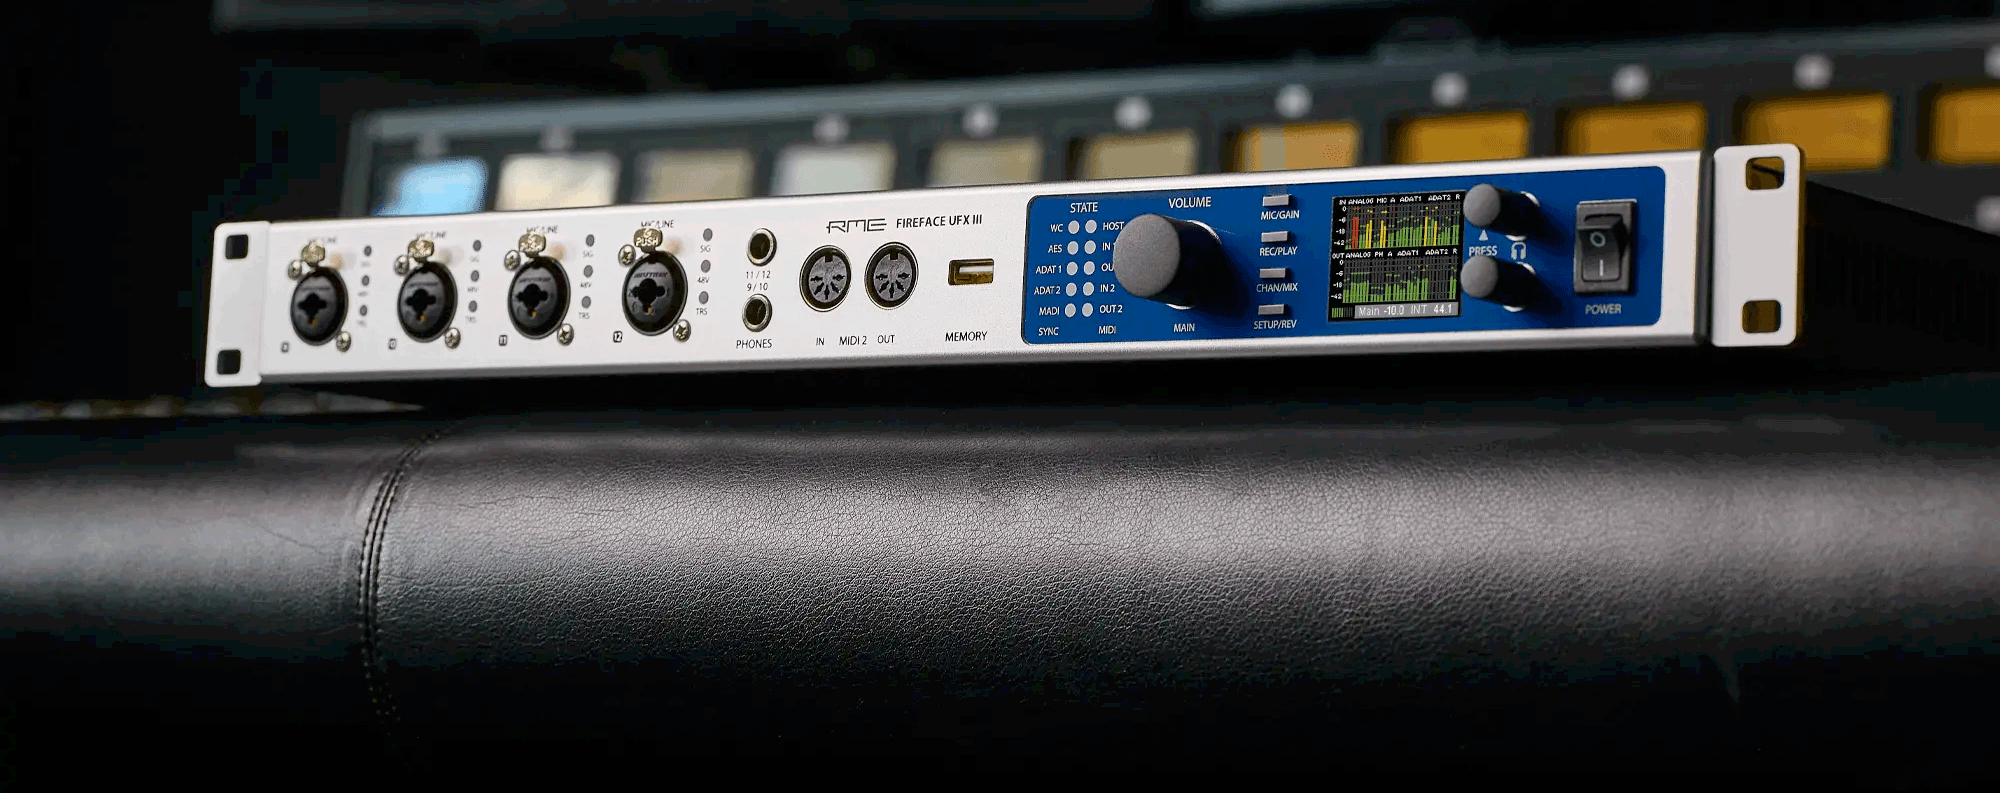 RME Fireface UFX III audio interface on a mixing console